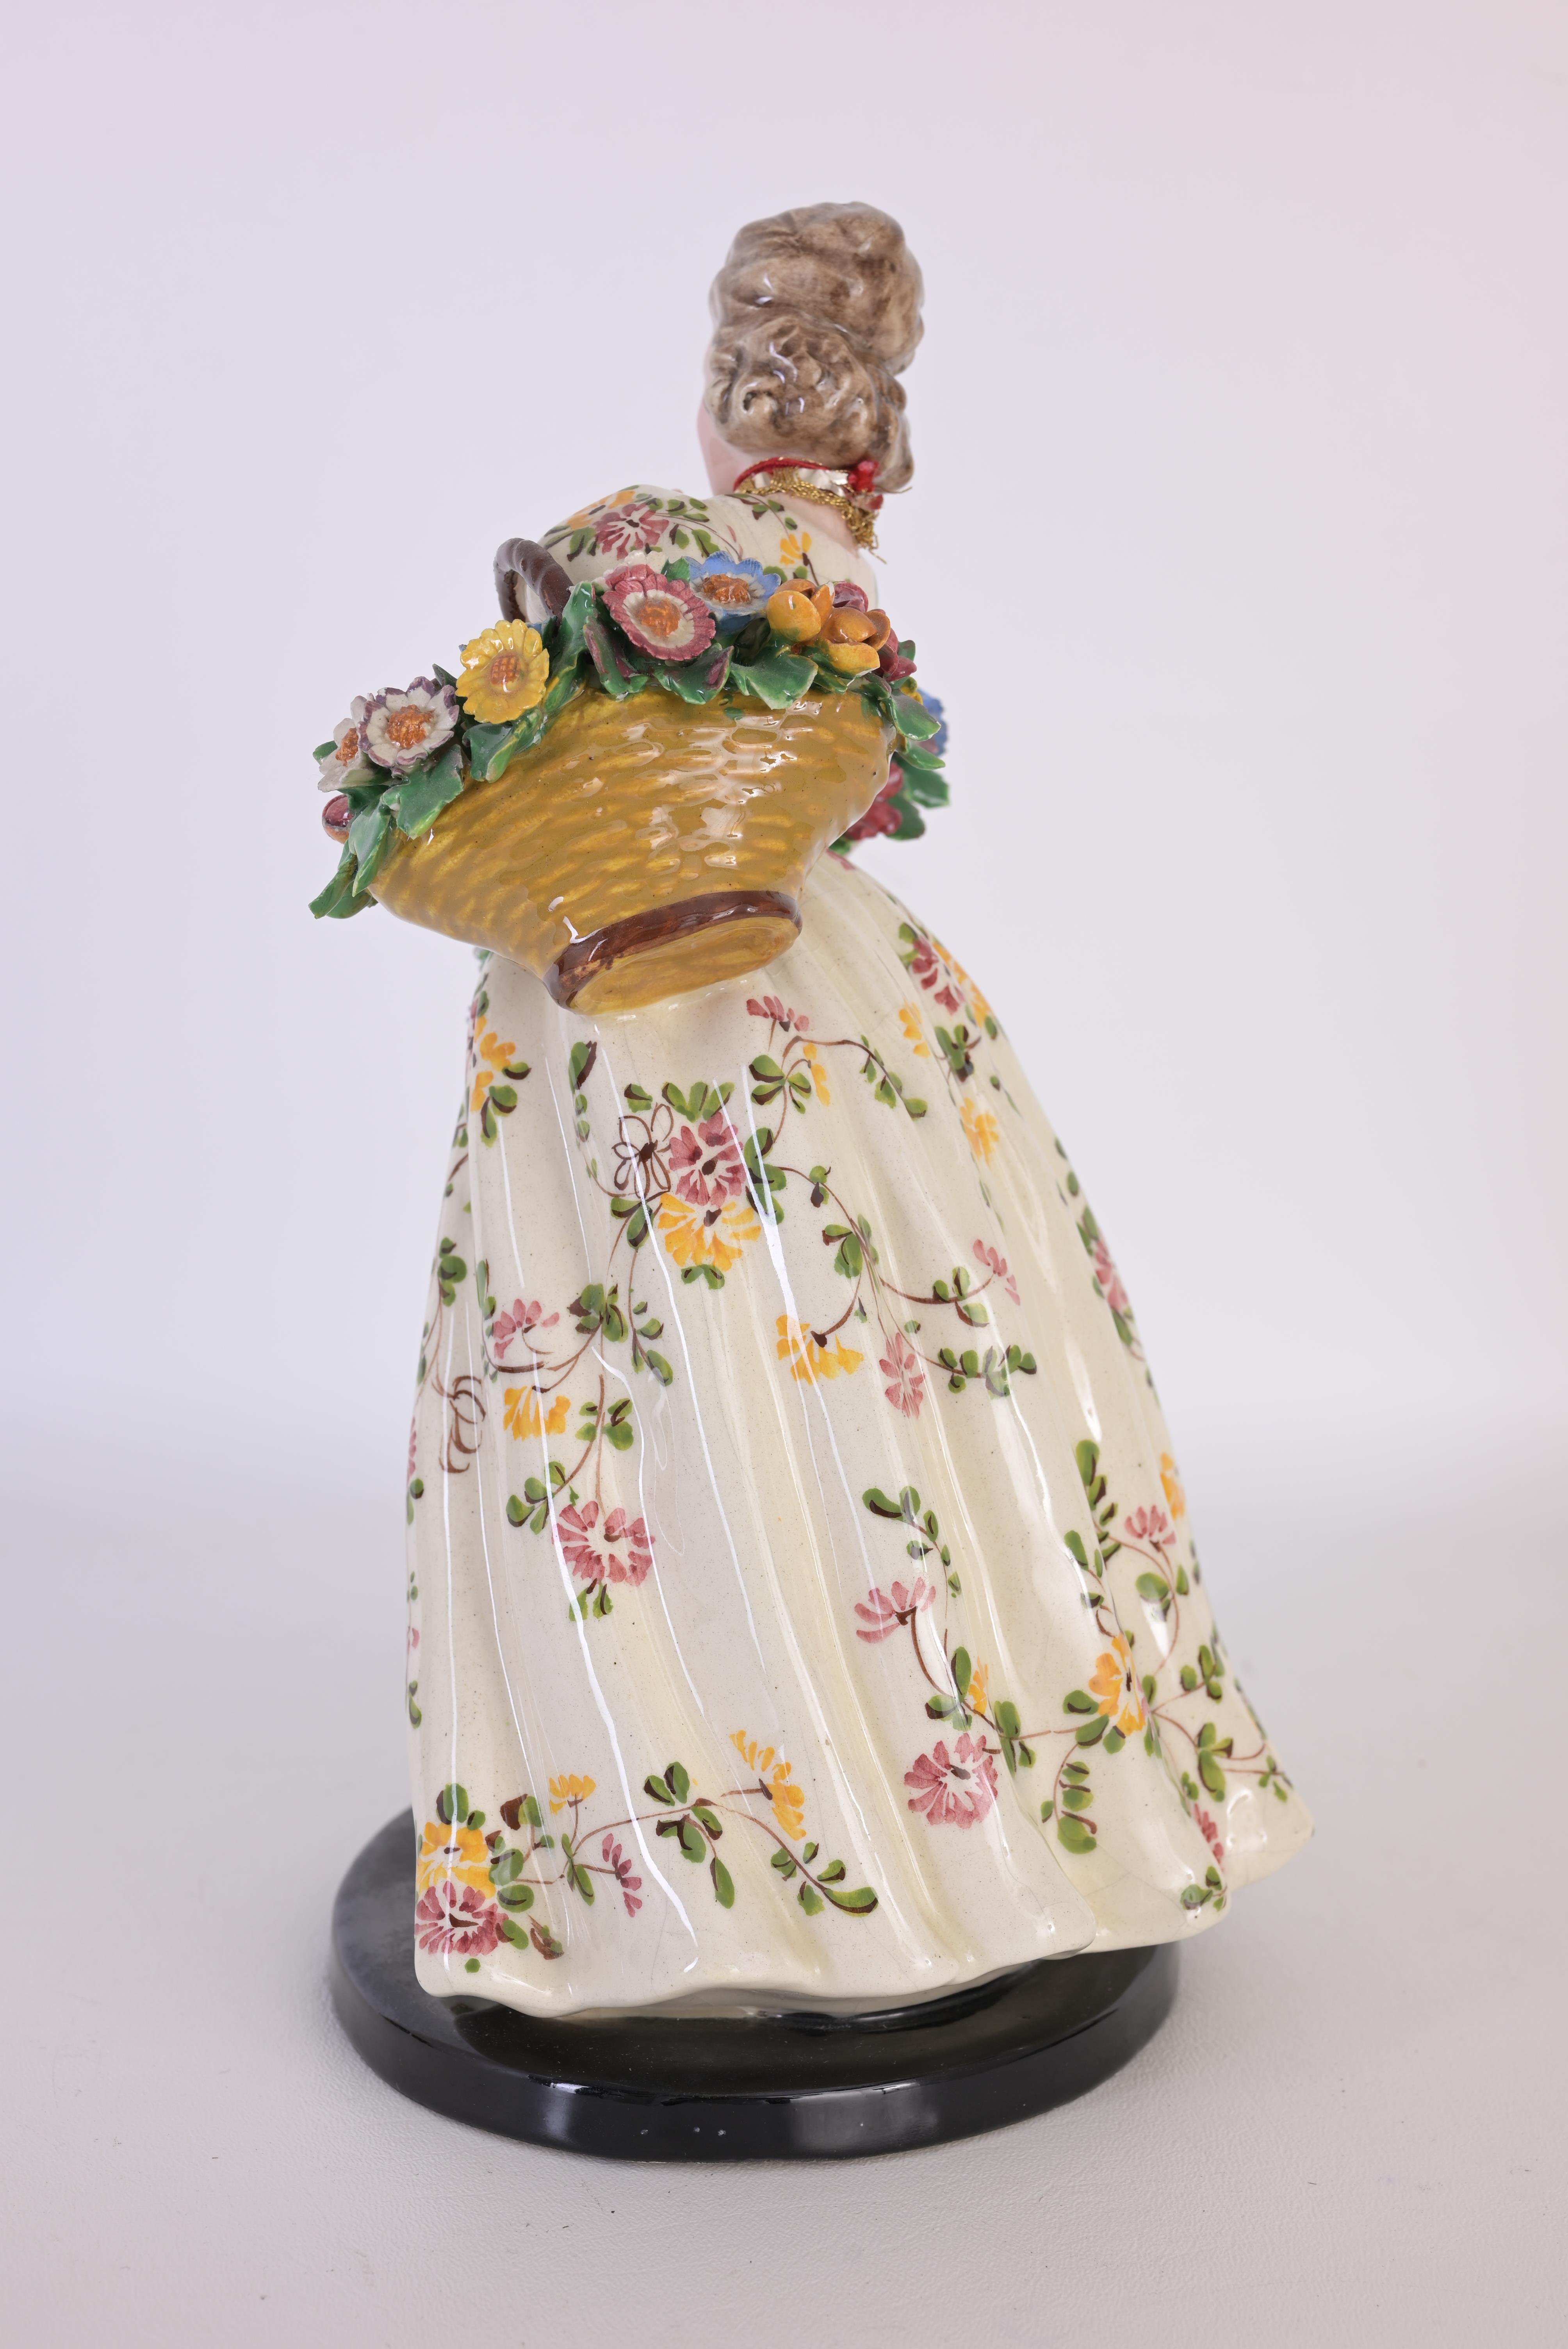 Dresden Style Porcelain Figurine - Image 6 of 9